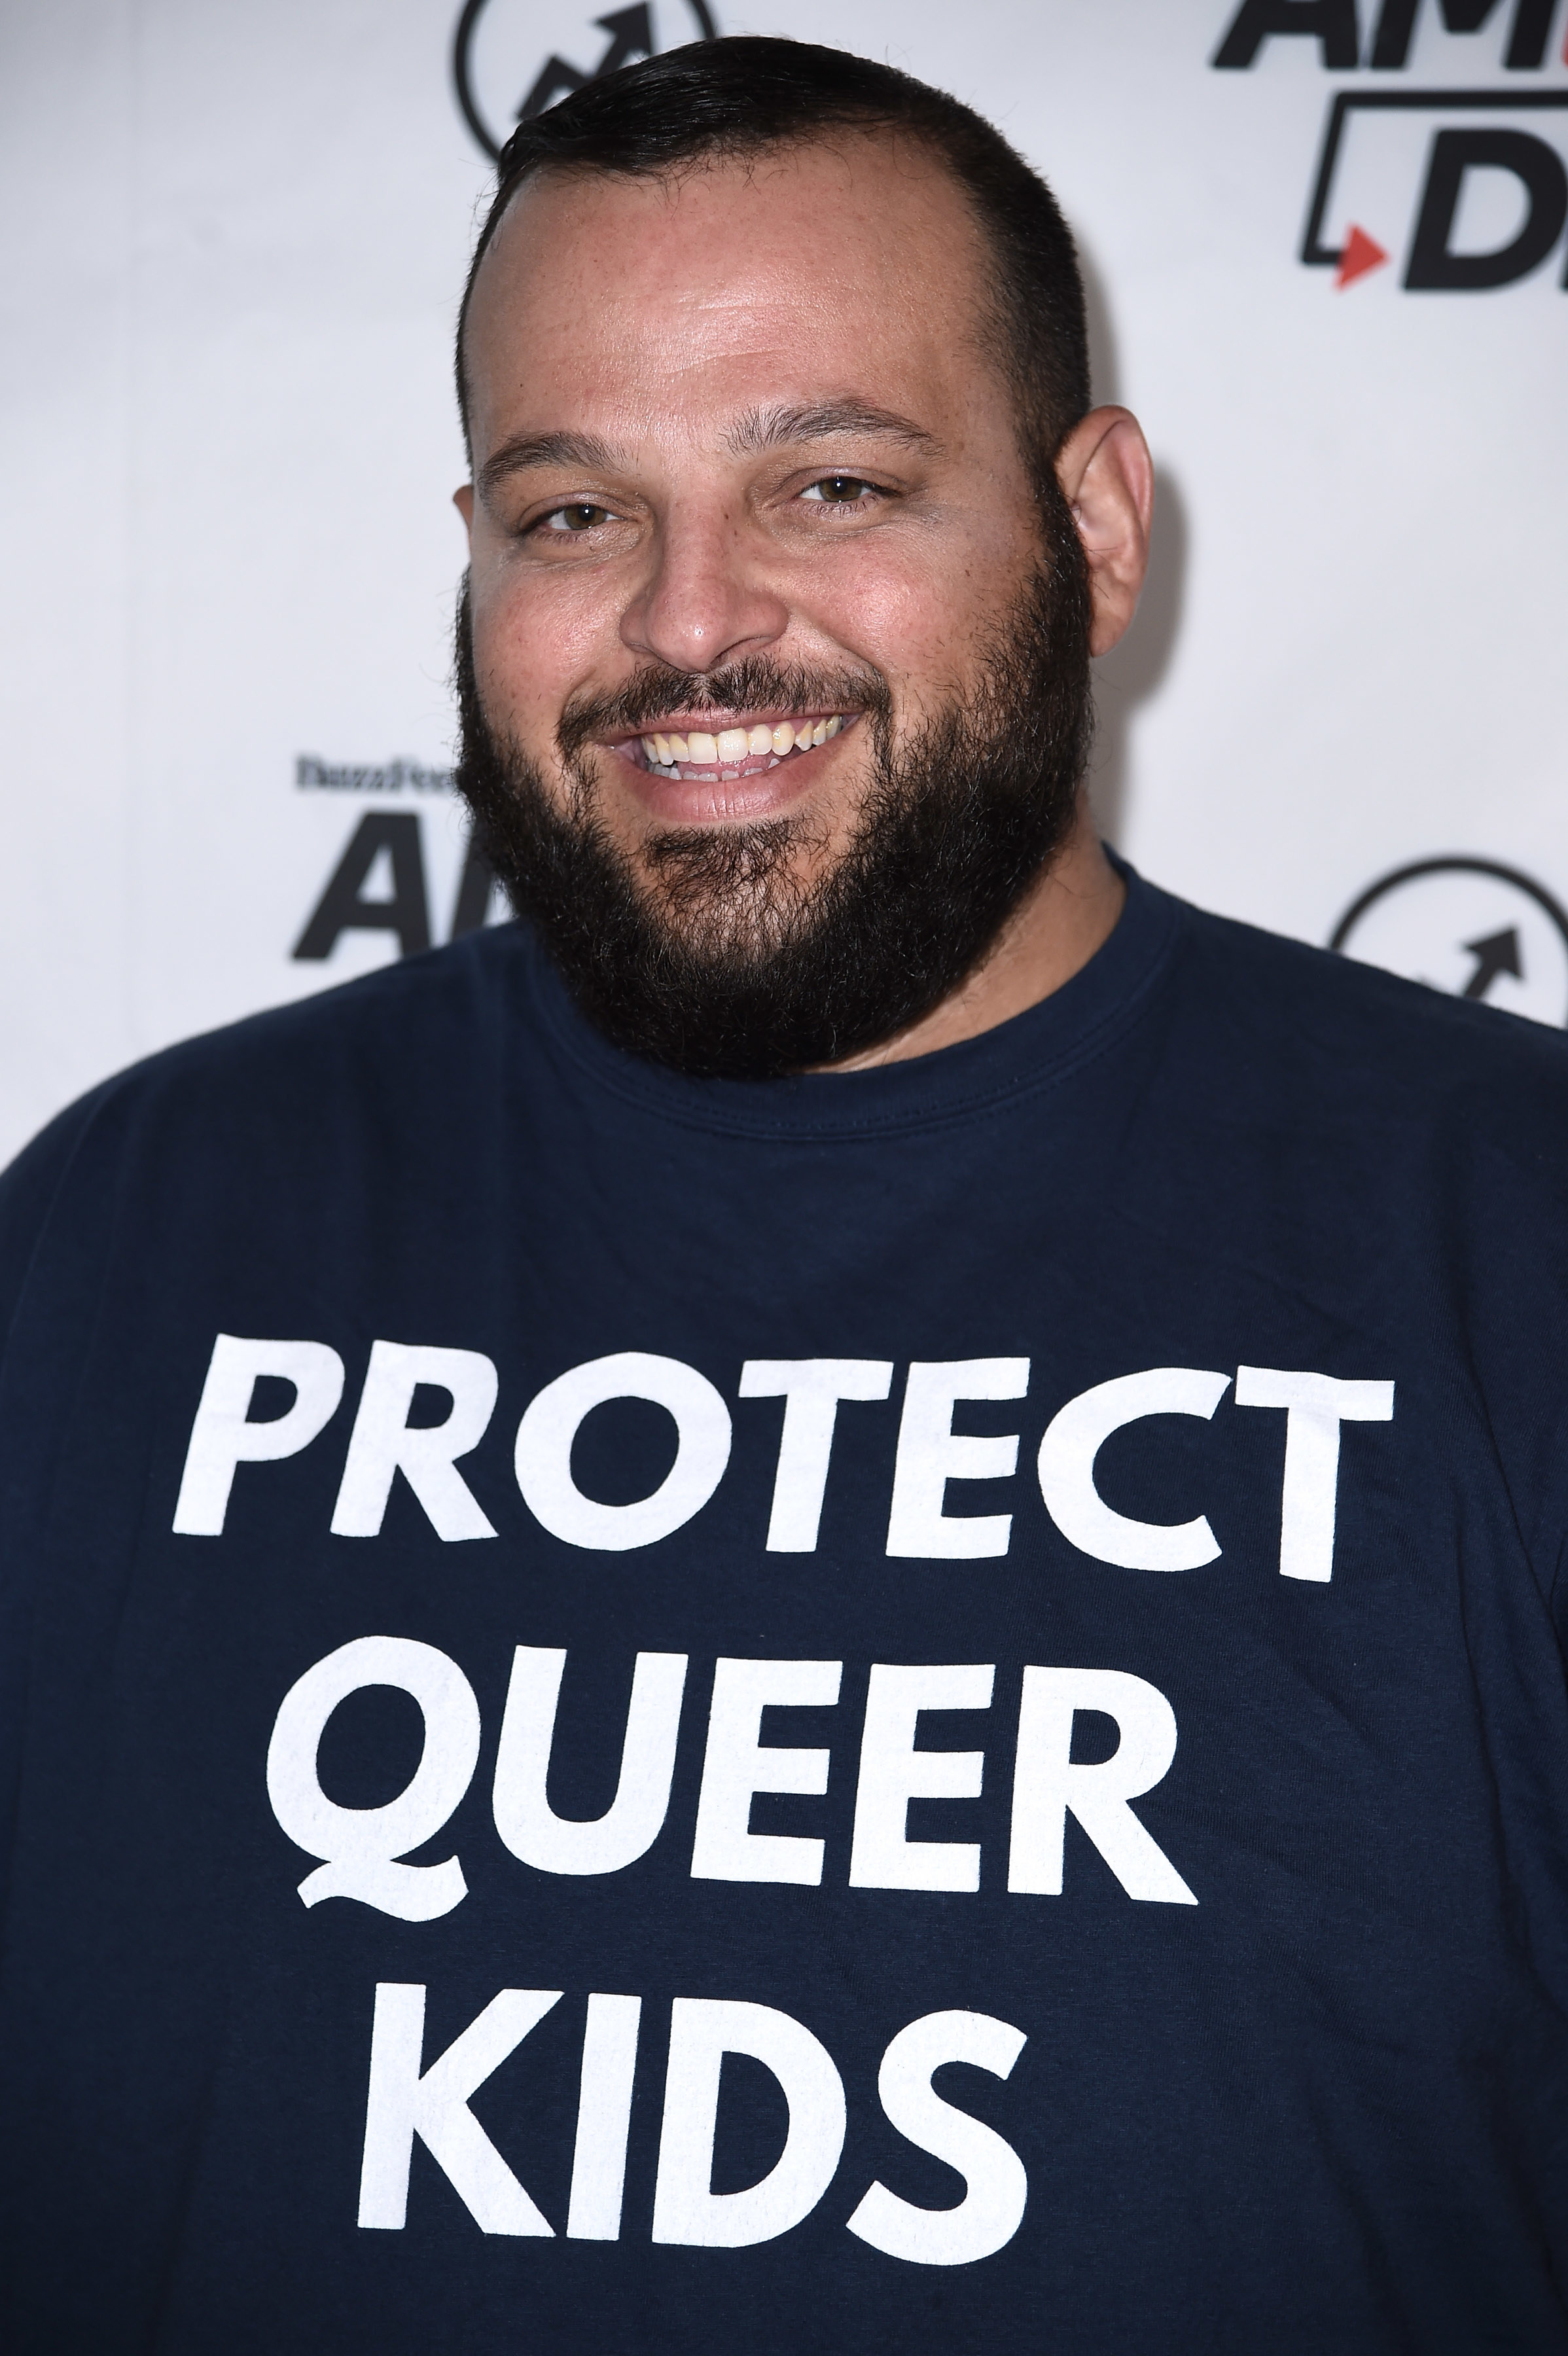 wearing a protect queer kids shirt